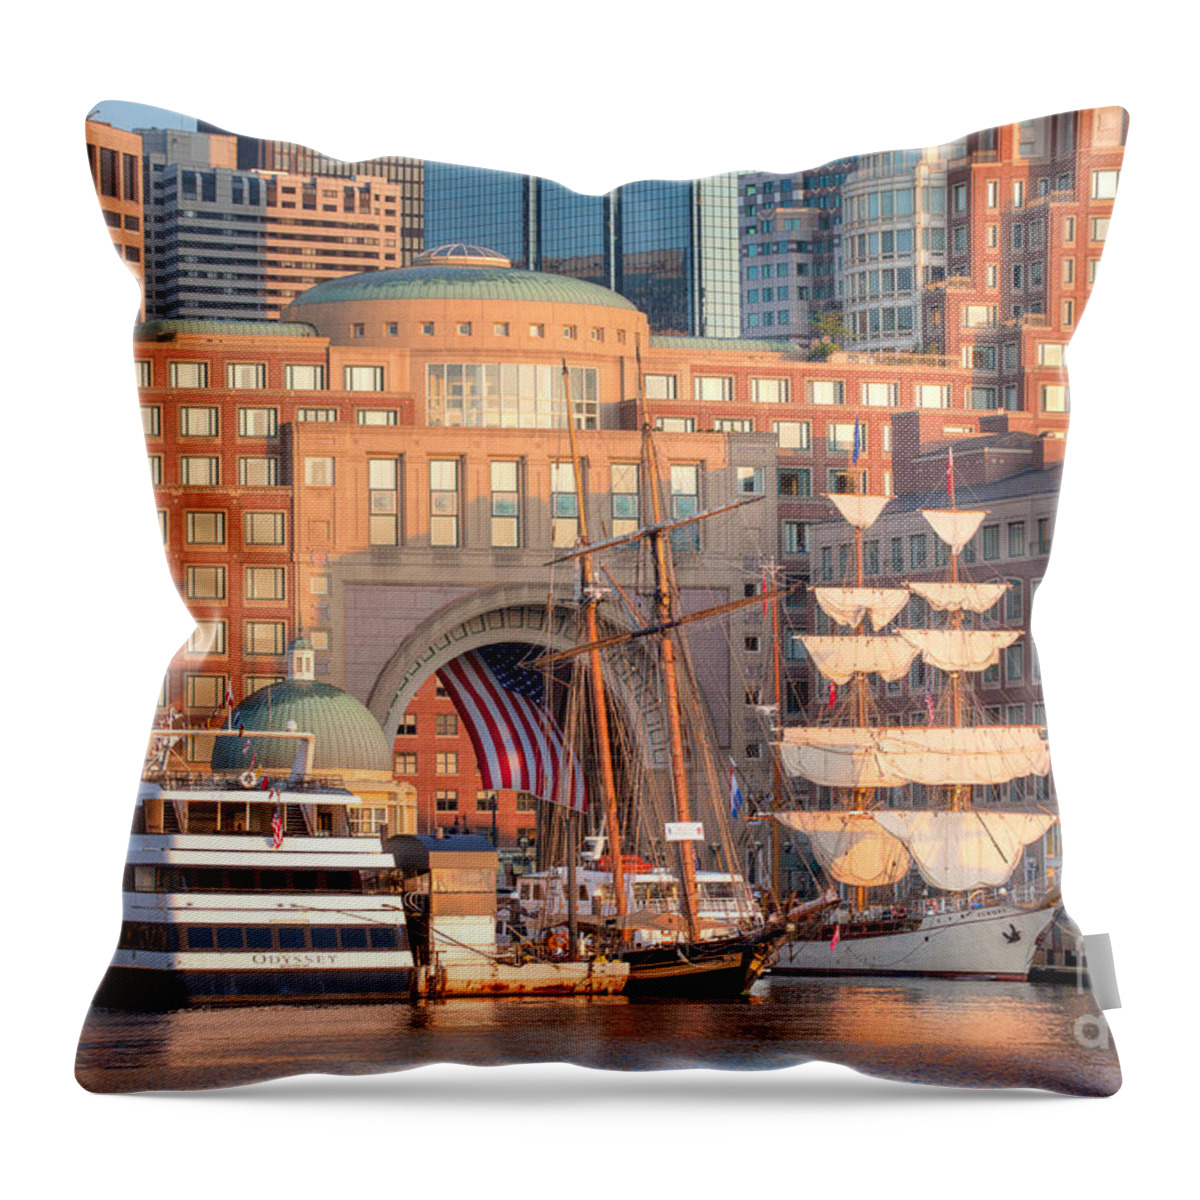 Asta Throw Pillow featuring the photograph Rowes Wharf by Susan Cole Kelly